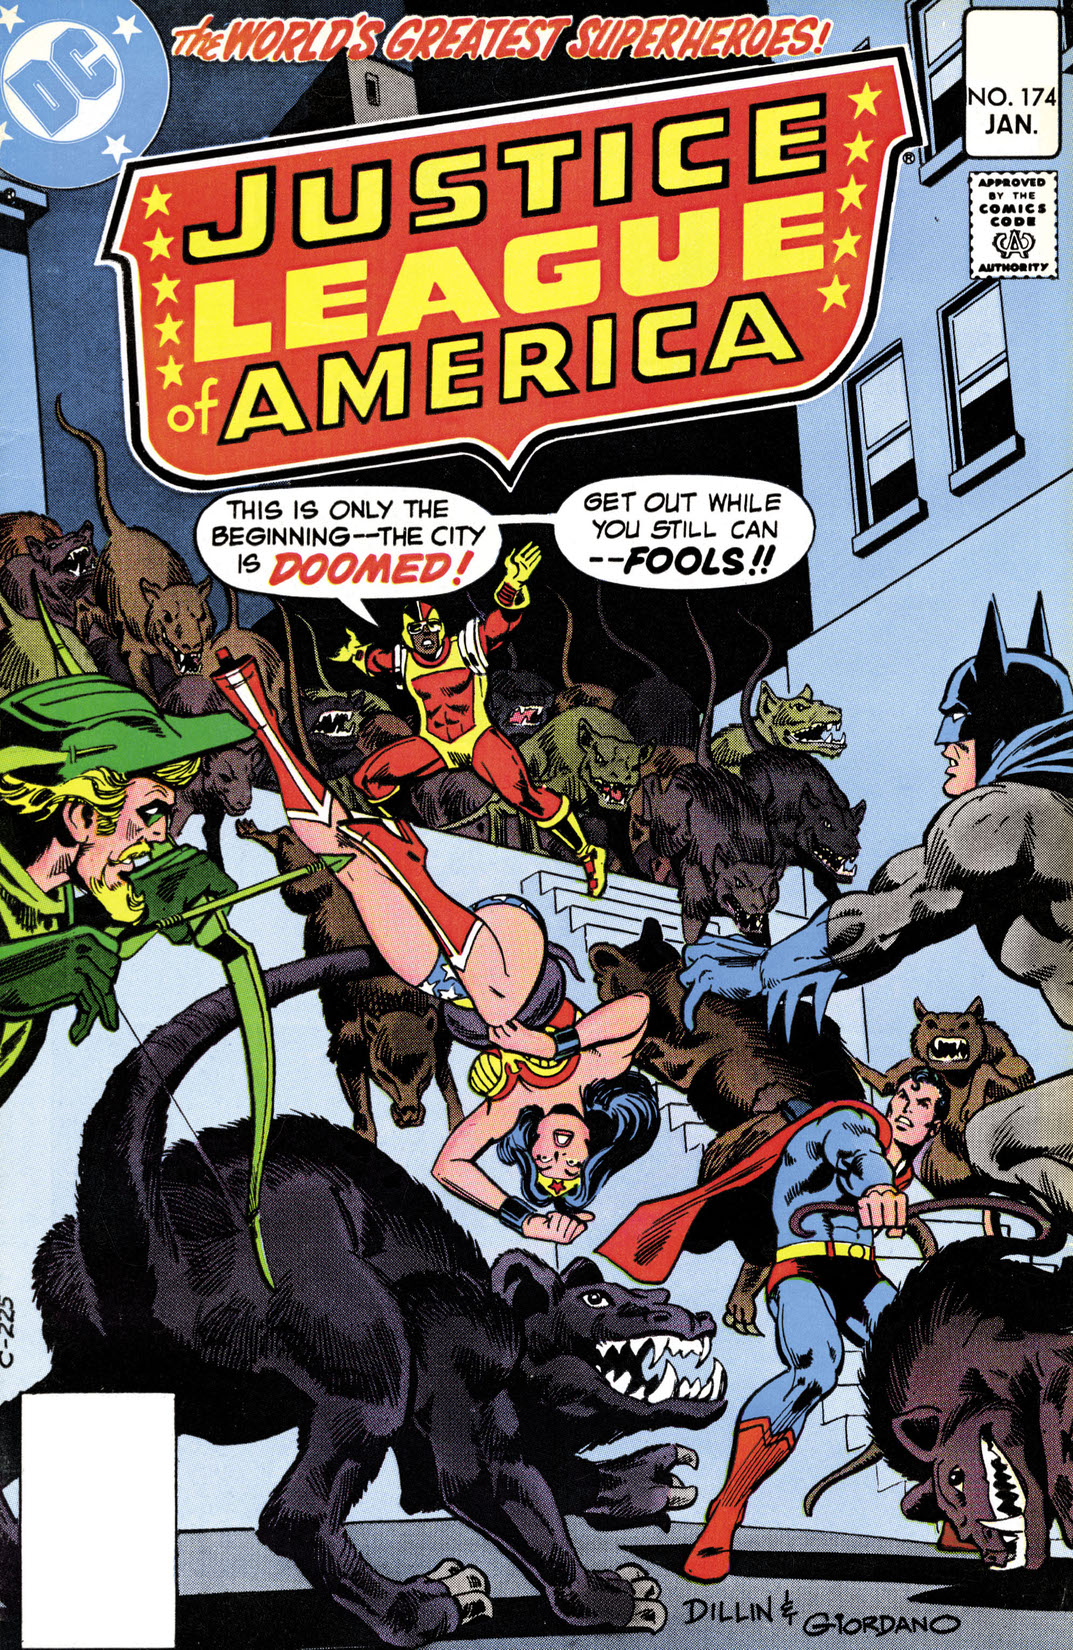 Justice League of America (1960-) #174 preview images